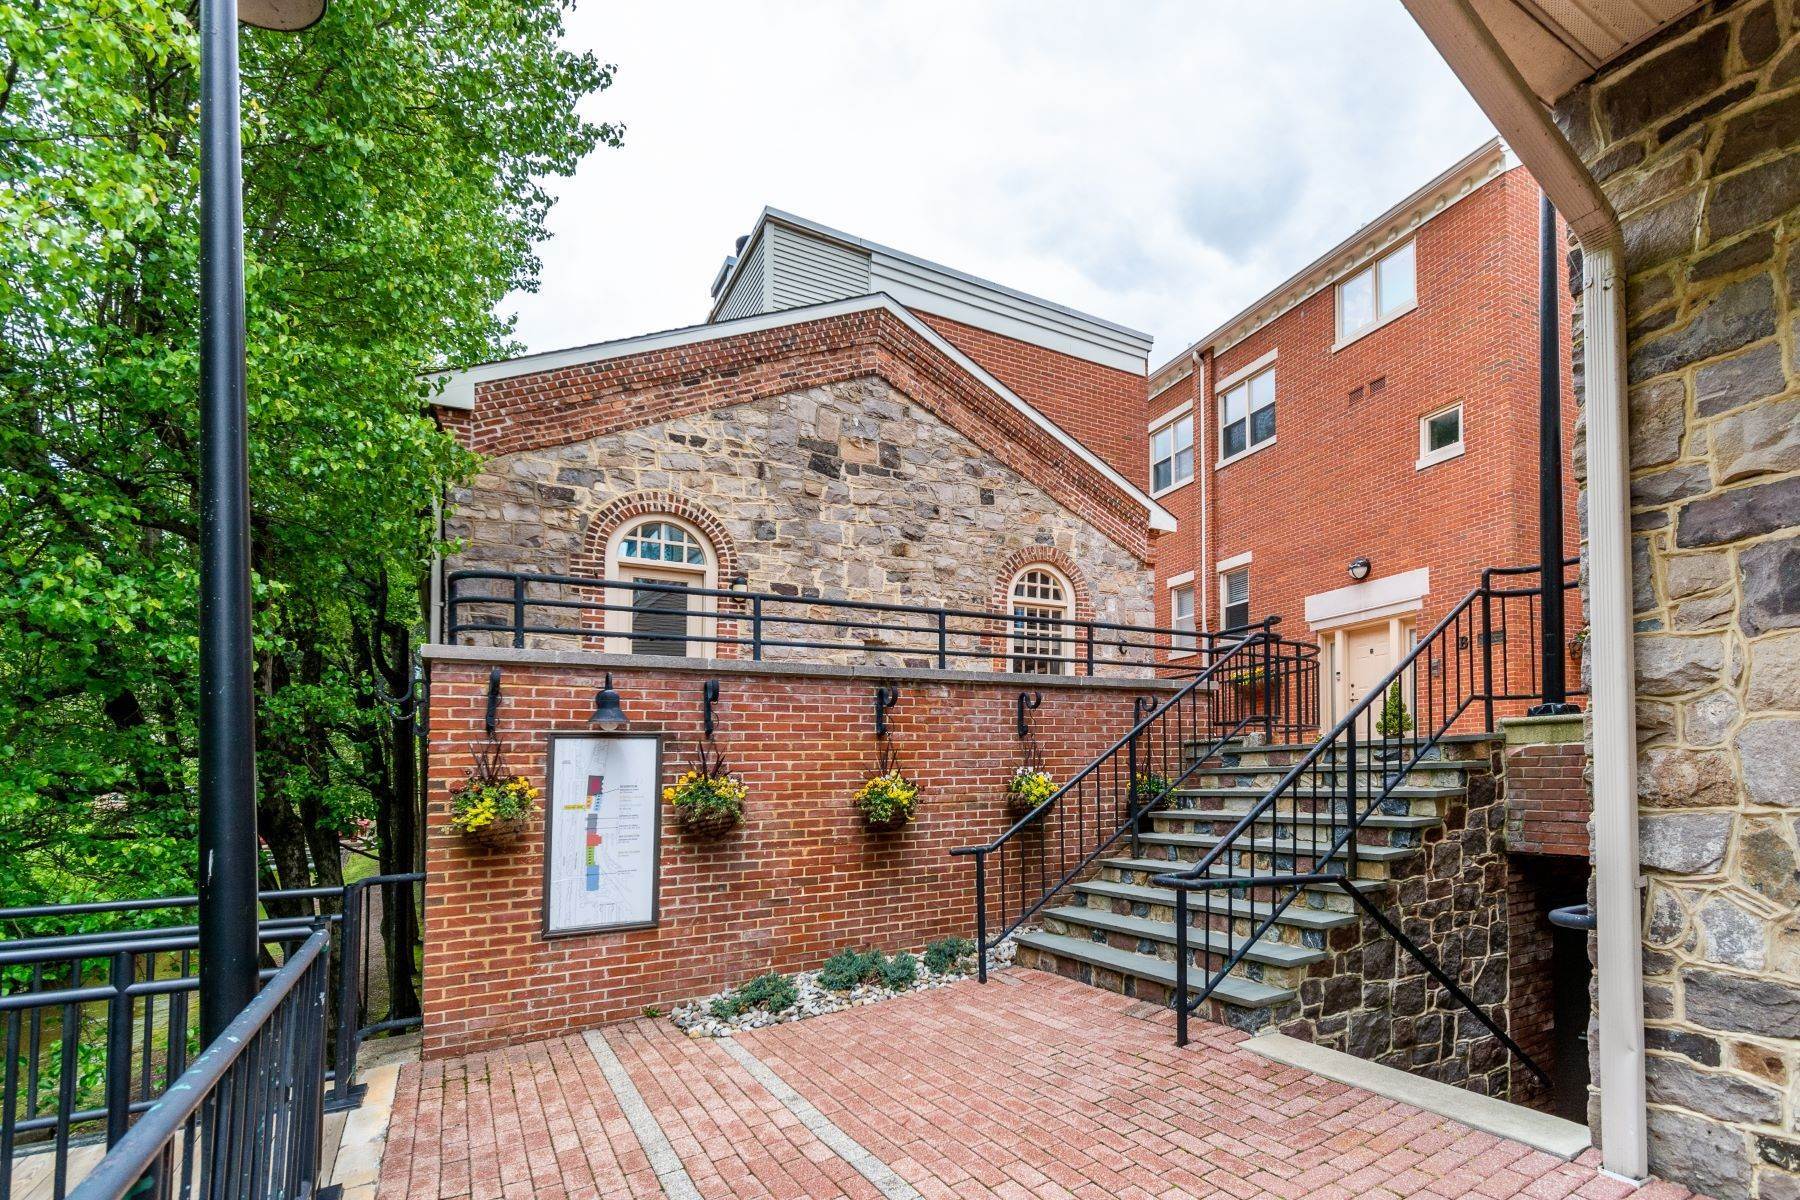 3. Condominiums for Sale at Impeccably Presented Townhome-style Unit in The Waterworks 350 River Road, Unit A11, New Hope, Pennsylvania 18938 United States